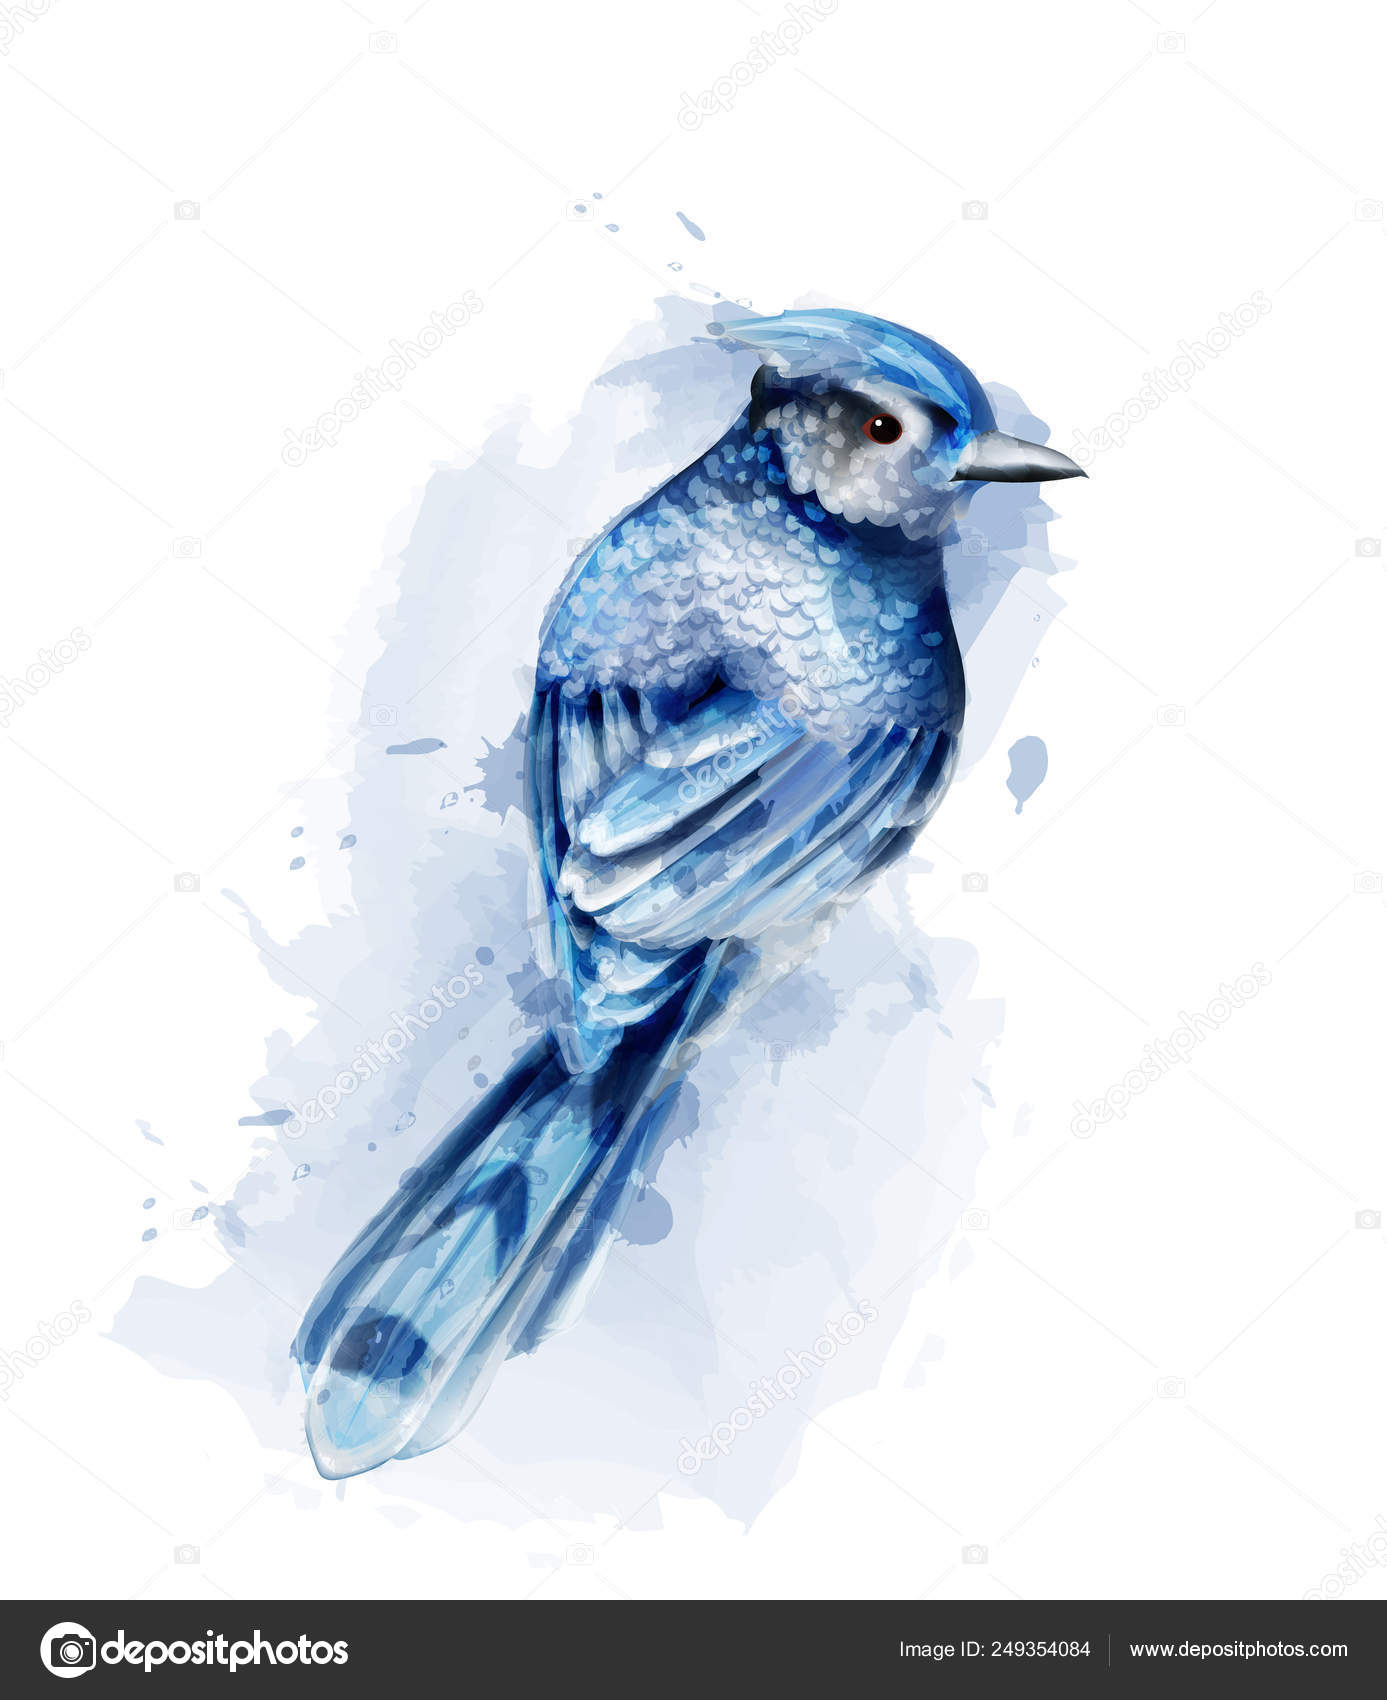 26 Watercolor Blue Jay Vector Images Watercolor Blue Jay Illustrations Depositphotos